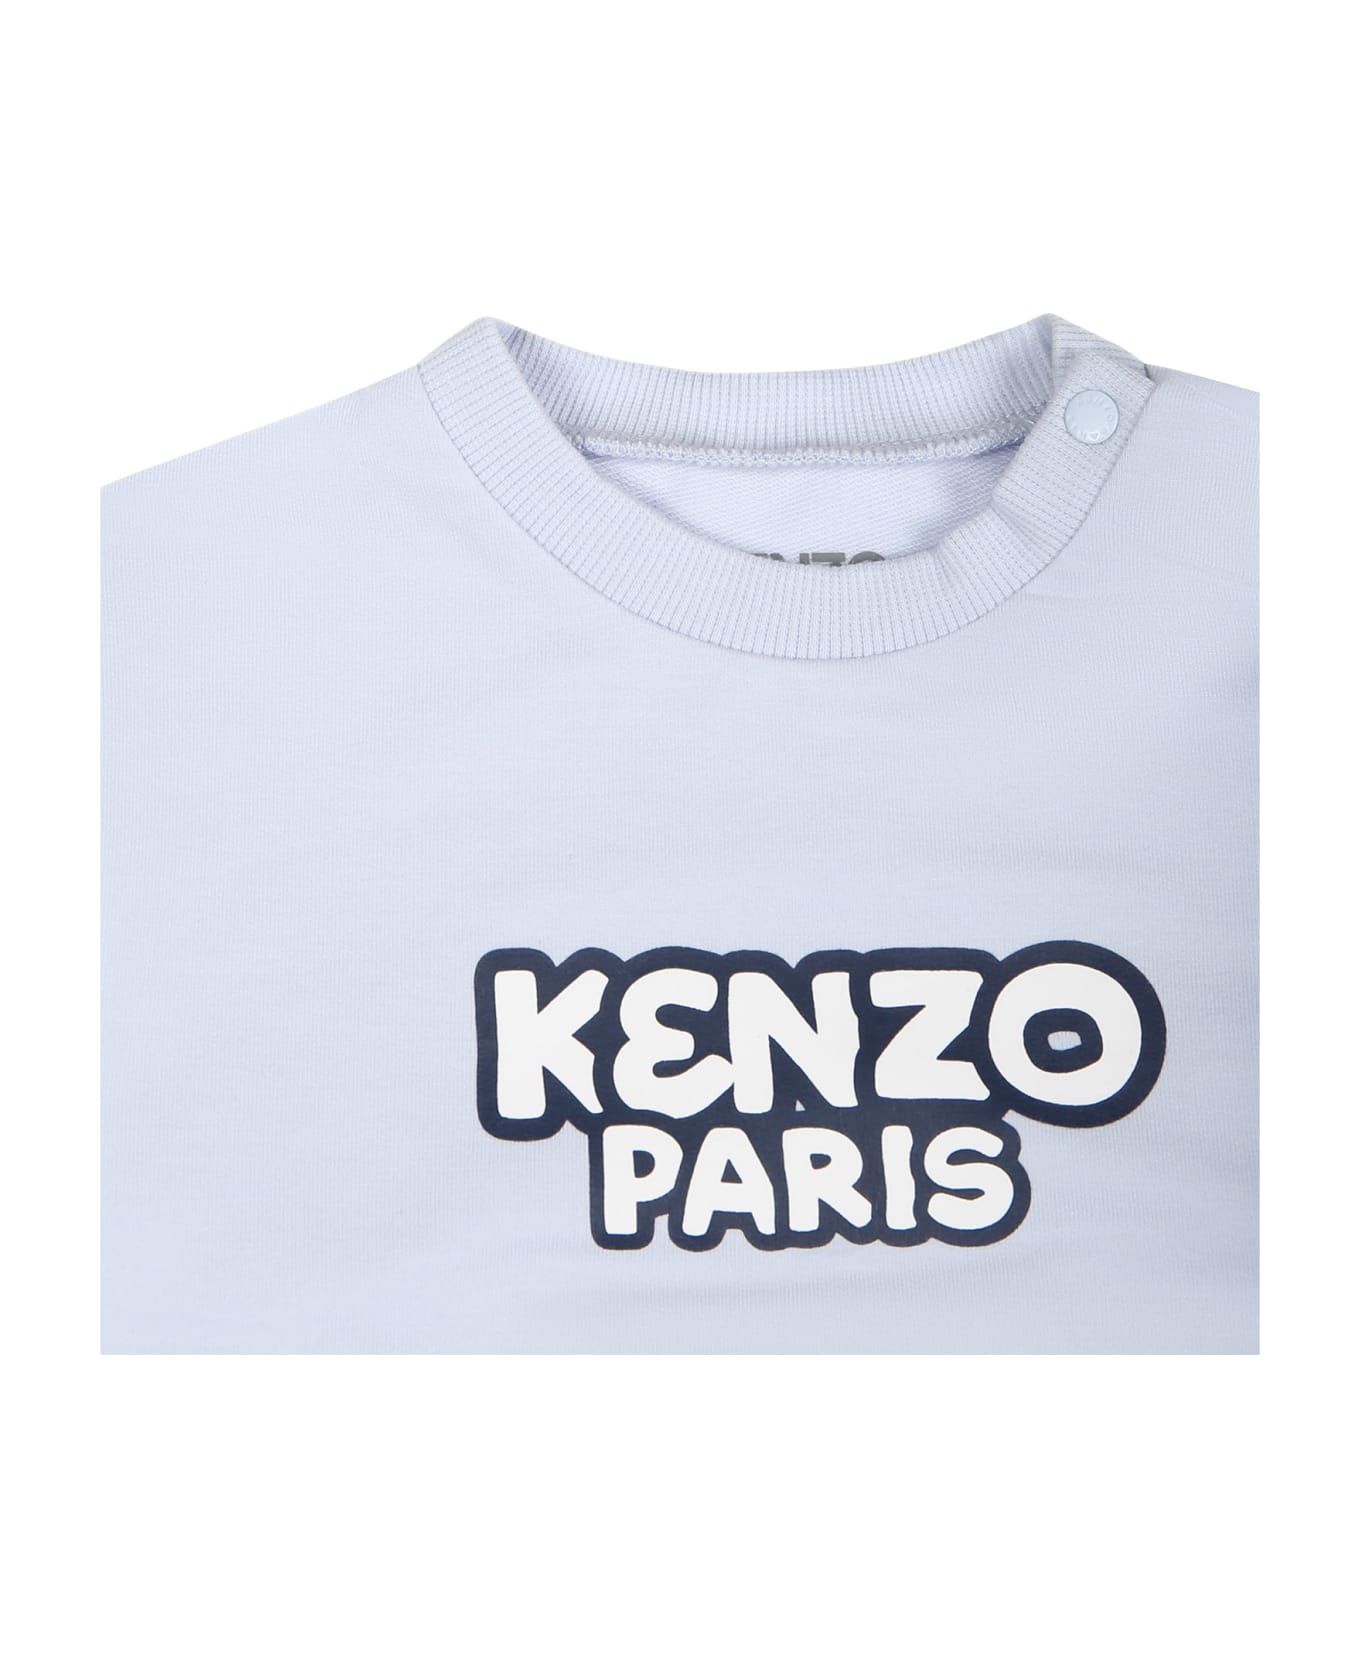 Kenzo Kids Sporty Suit For Newborn With Printing And Logo - Light Blue